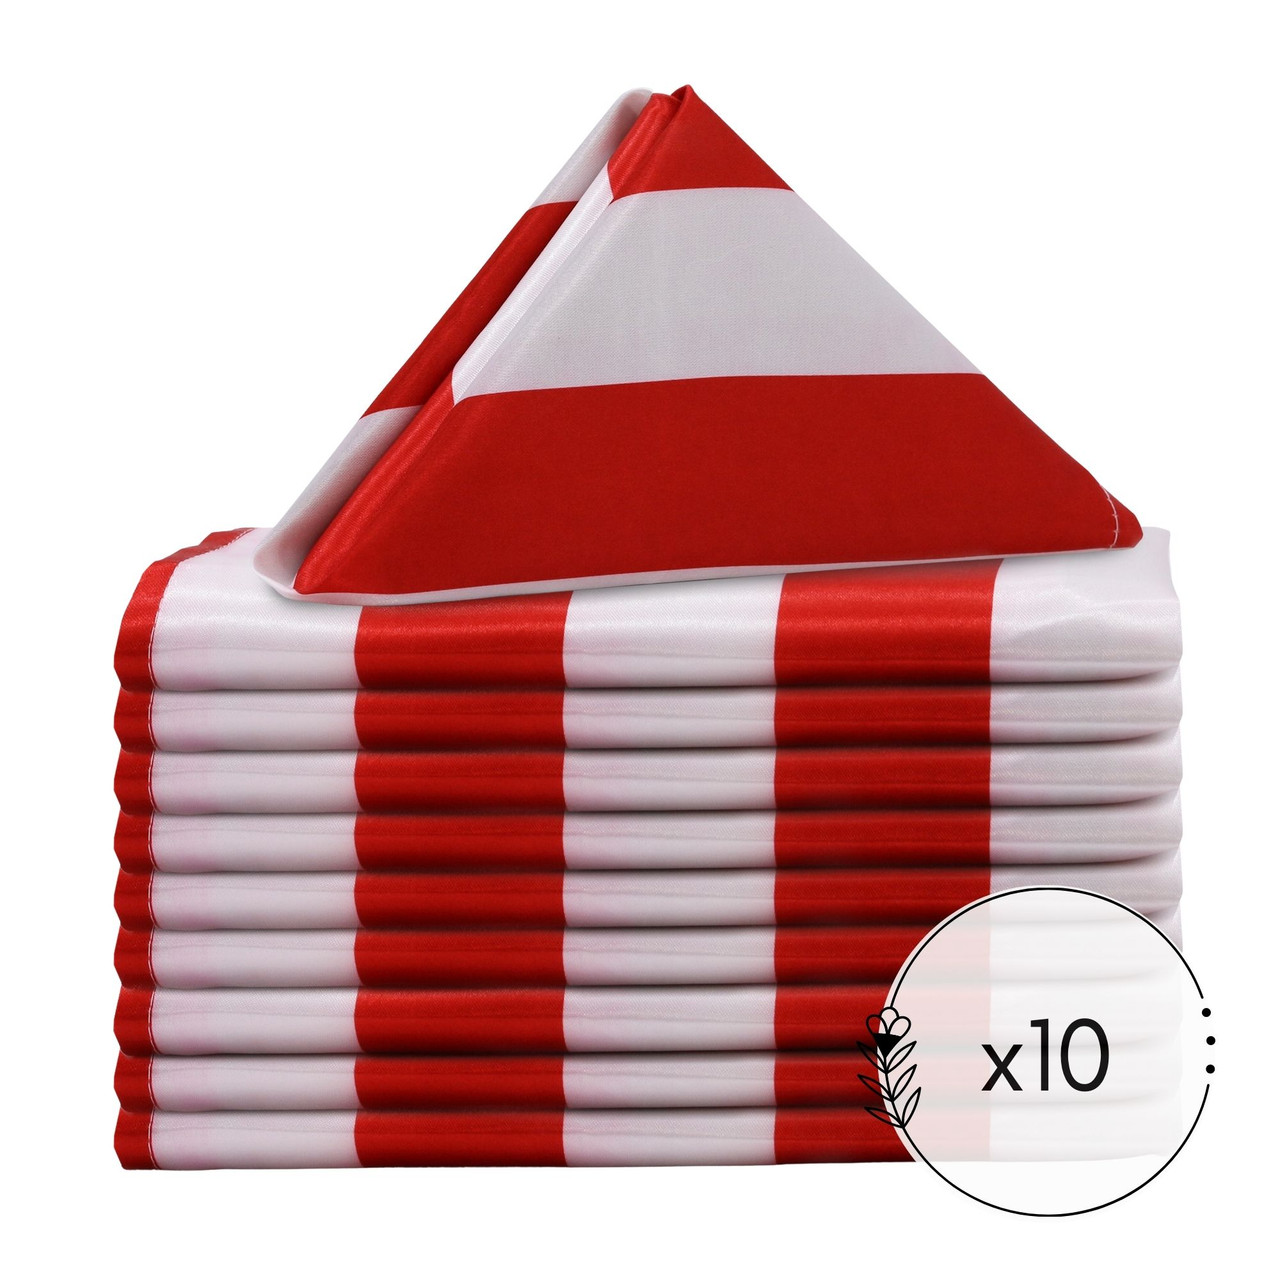 https://cdn11.bigcommerce.com/s-bch7e9/images/stencil/1280x1280/products/1215/17048/satin-napkin-red-striped-pack-of-10-2__44086.1689699568.jpg?c=2